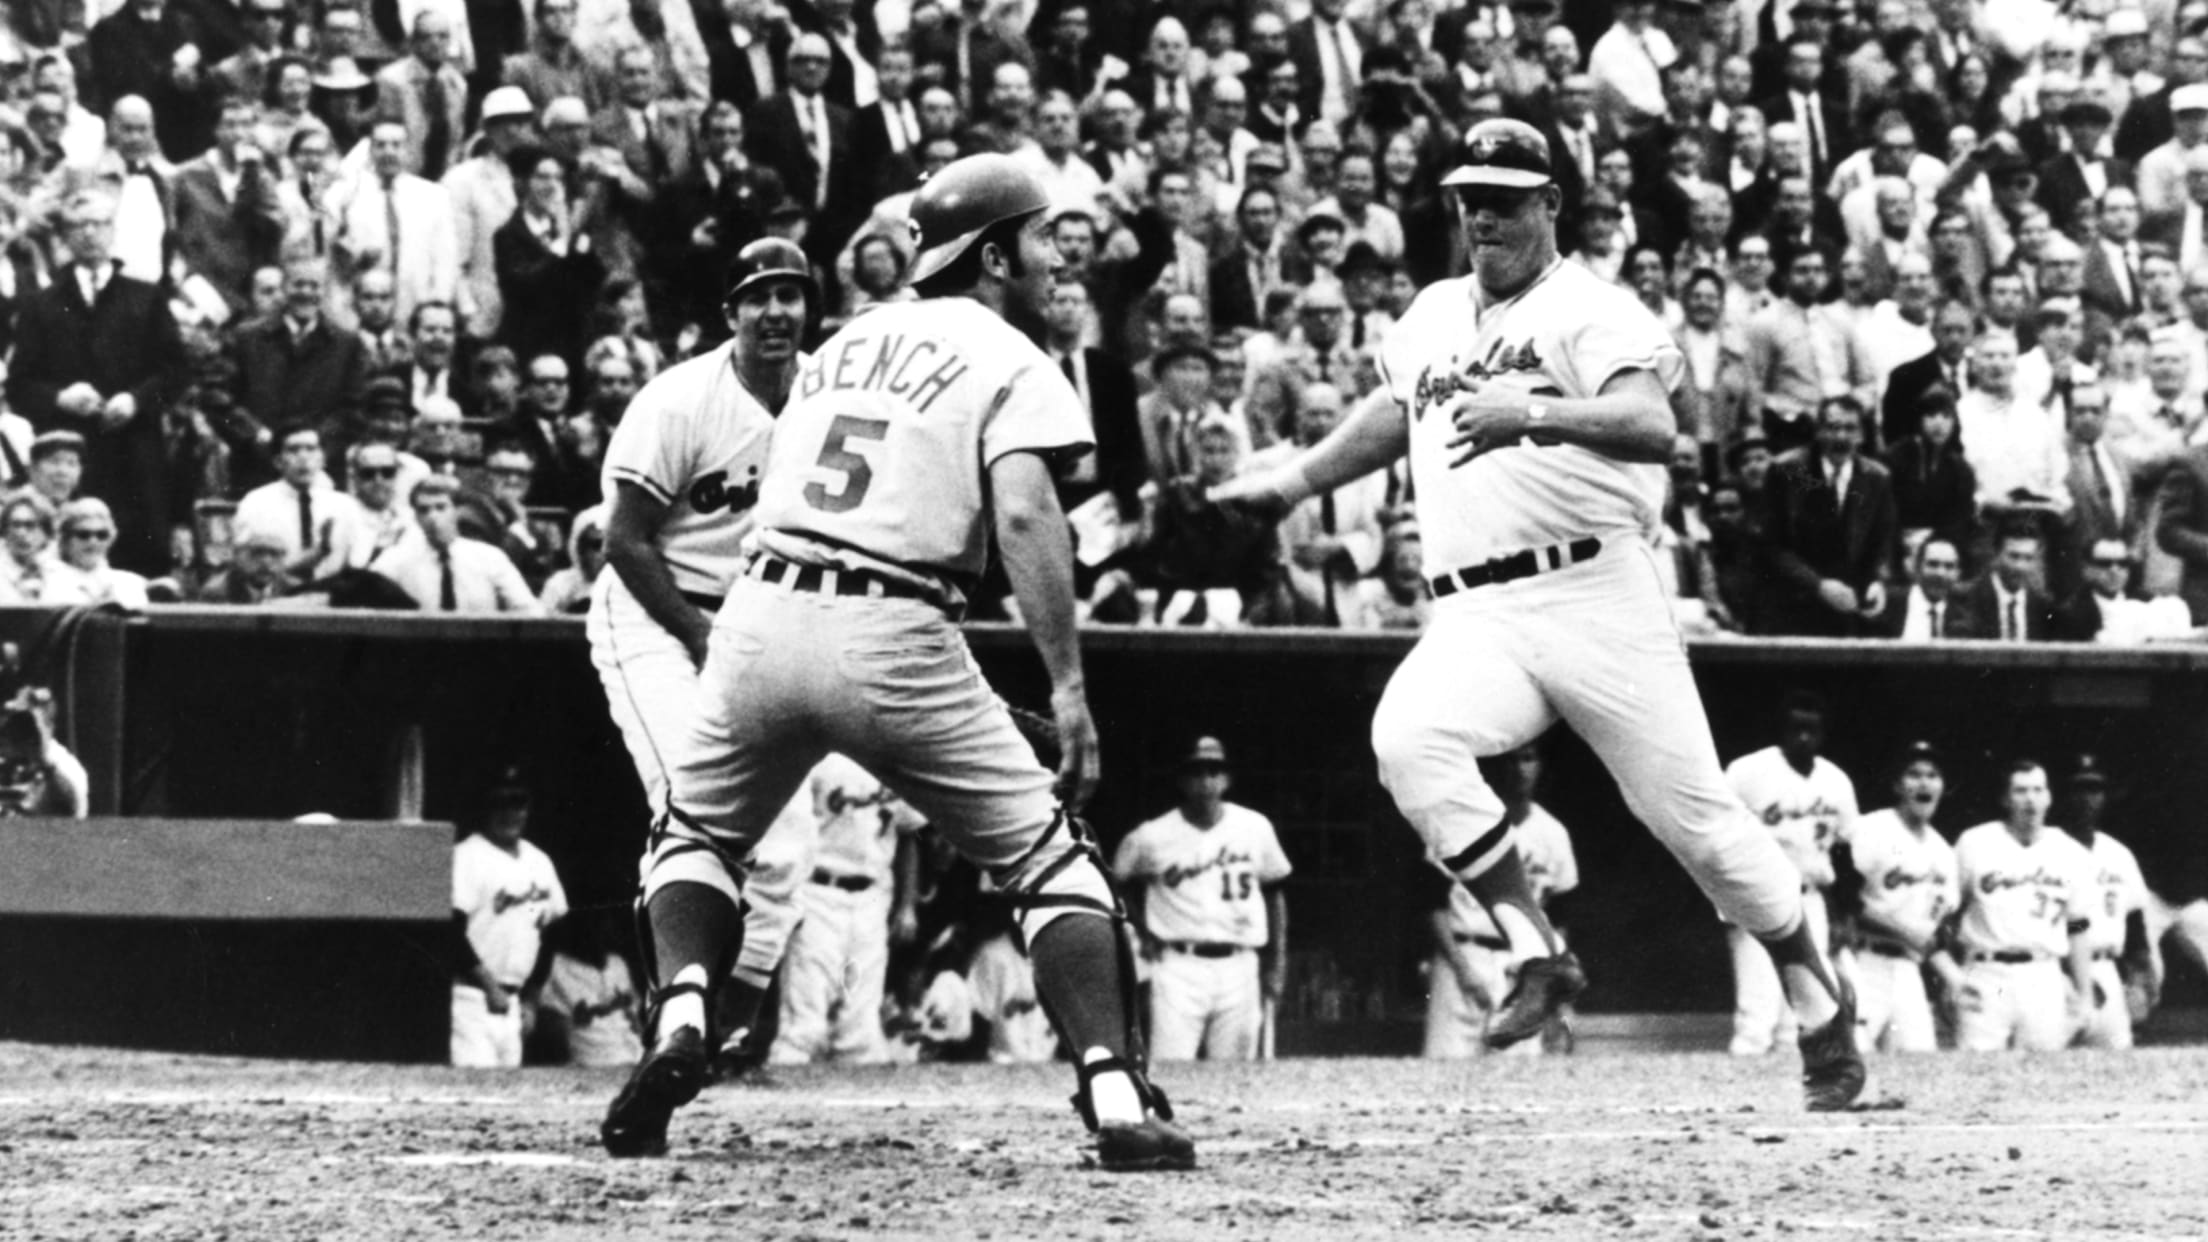 80 Facts About Boog Powell on His 80th